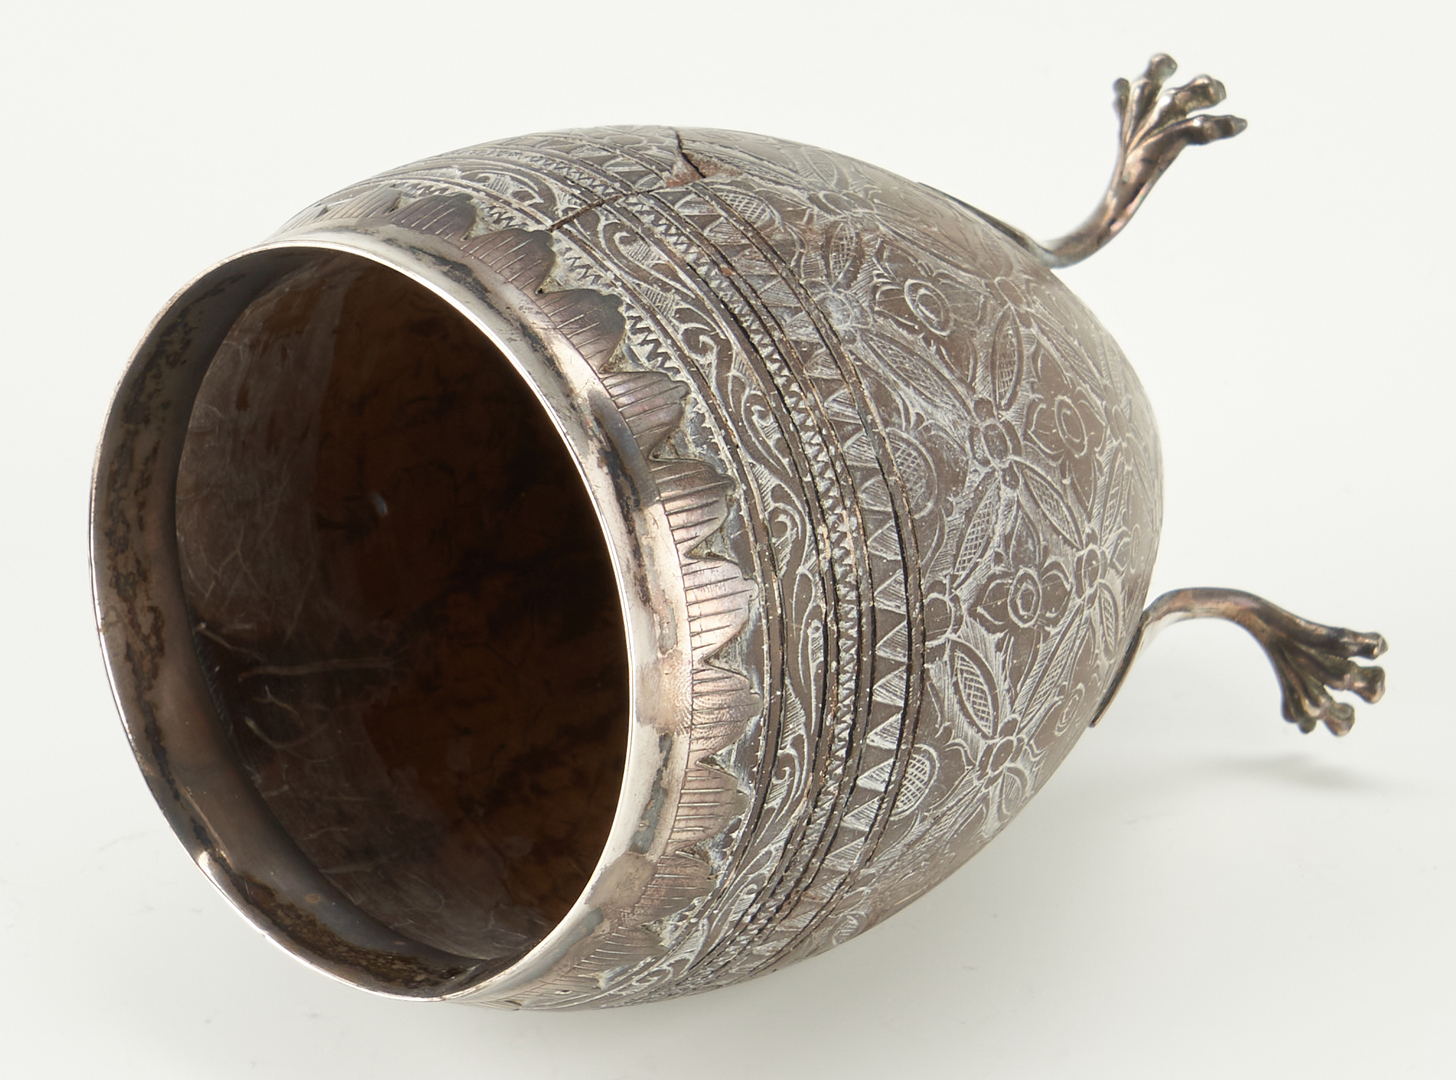 Lot 55: Silver Mounted Coconut Cup, Desk Clip, & Egg Inkwell